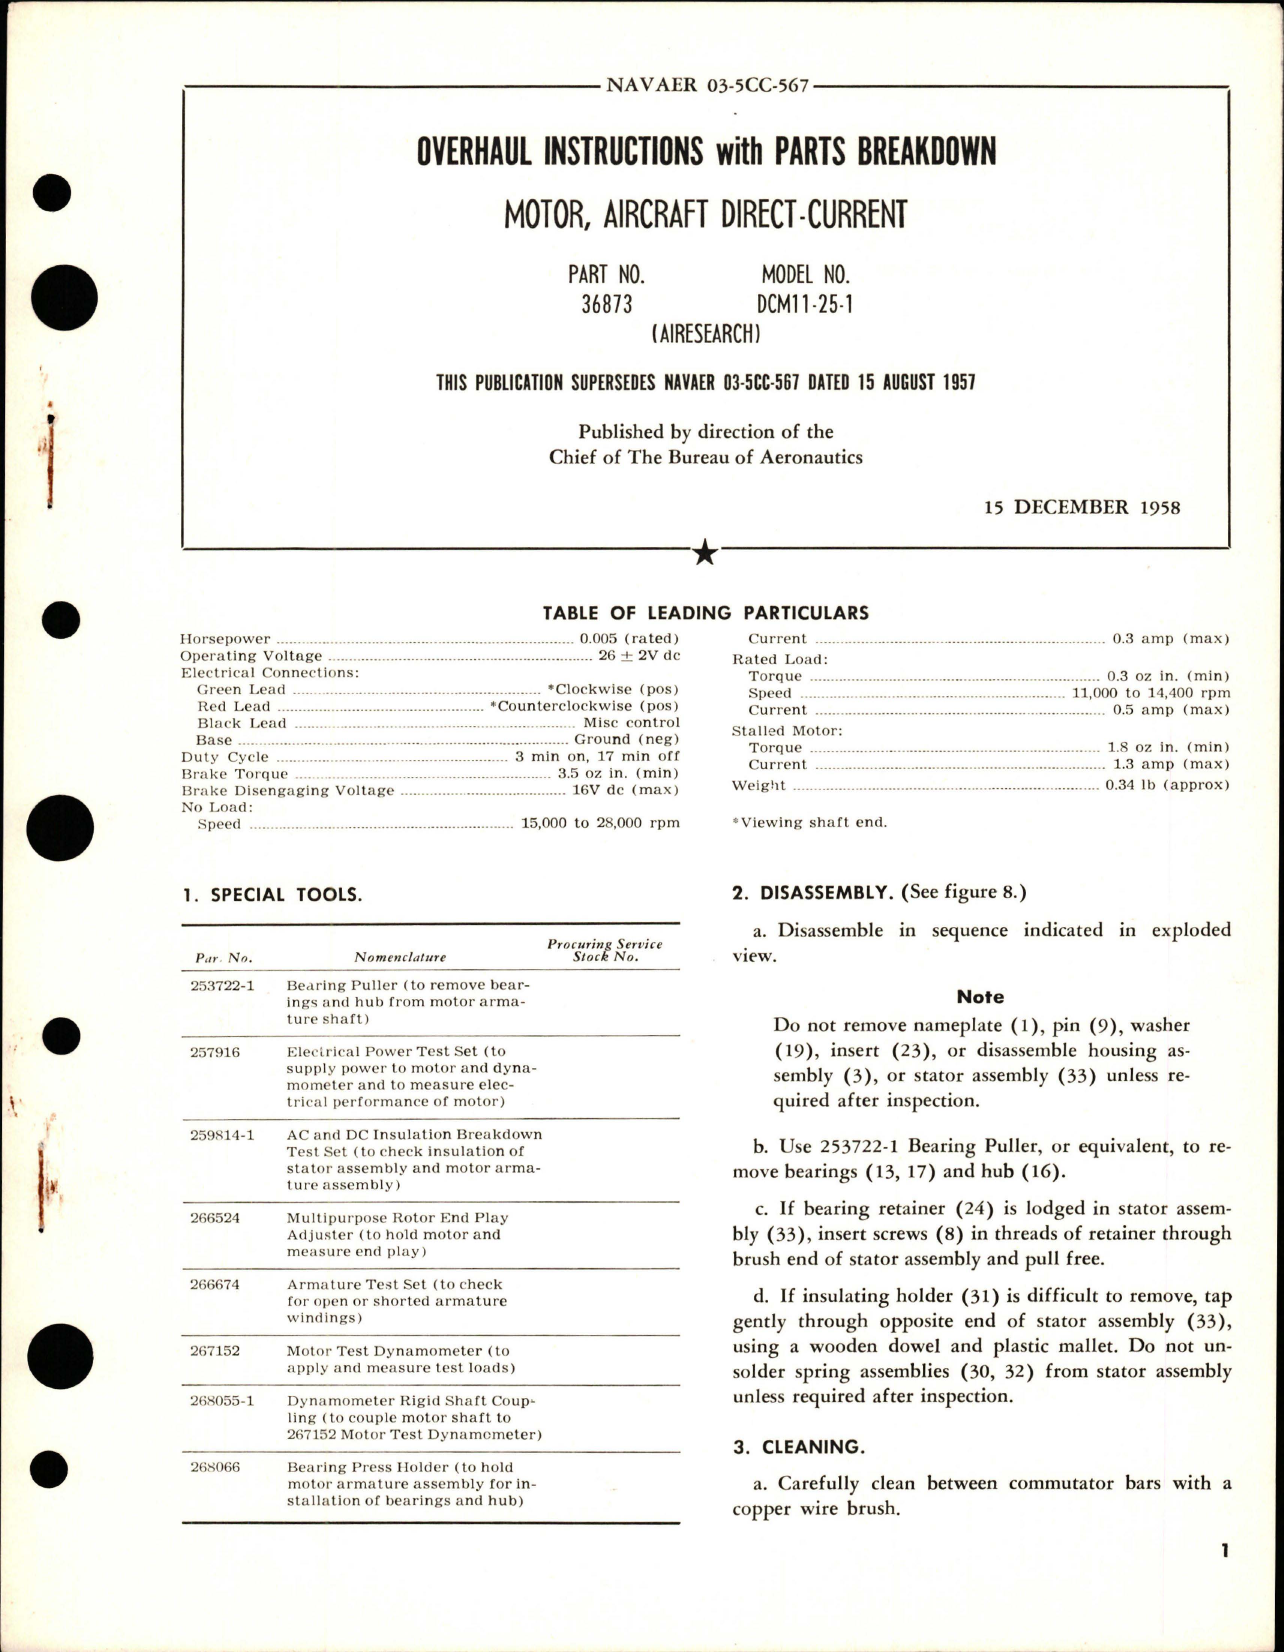 Sample page 1 from AirCorps Library document: Overhaul Instructions with Parts Breakdown for Direct-Current Motor - Part 36873 - Model DCM11-25-1